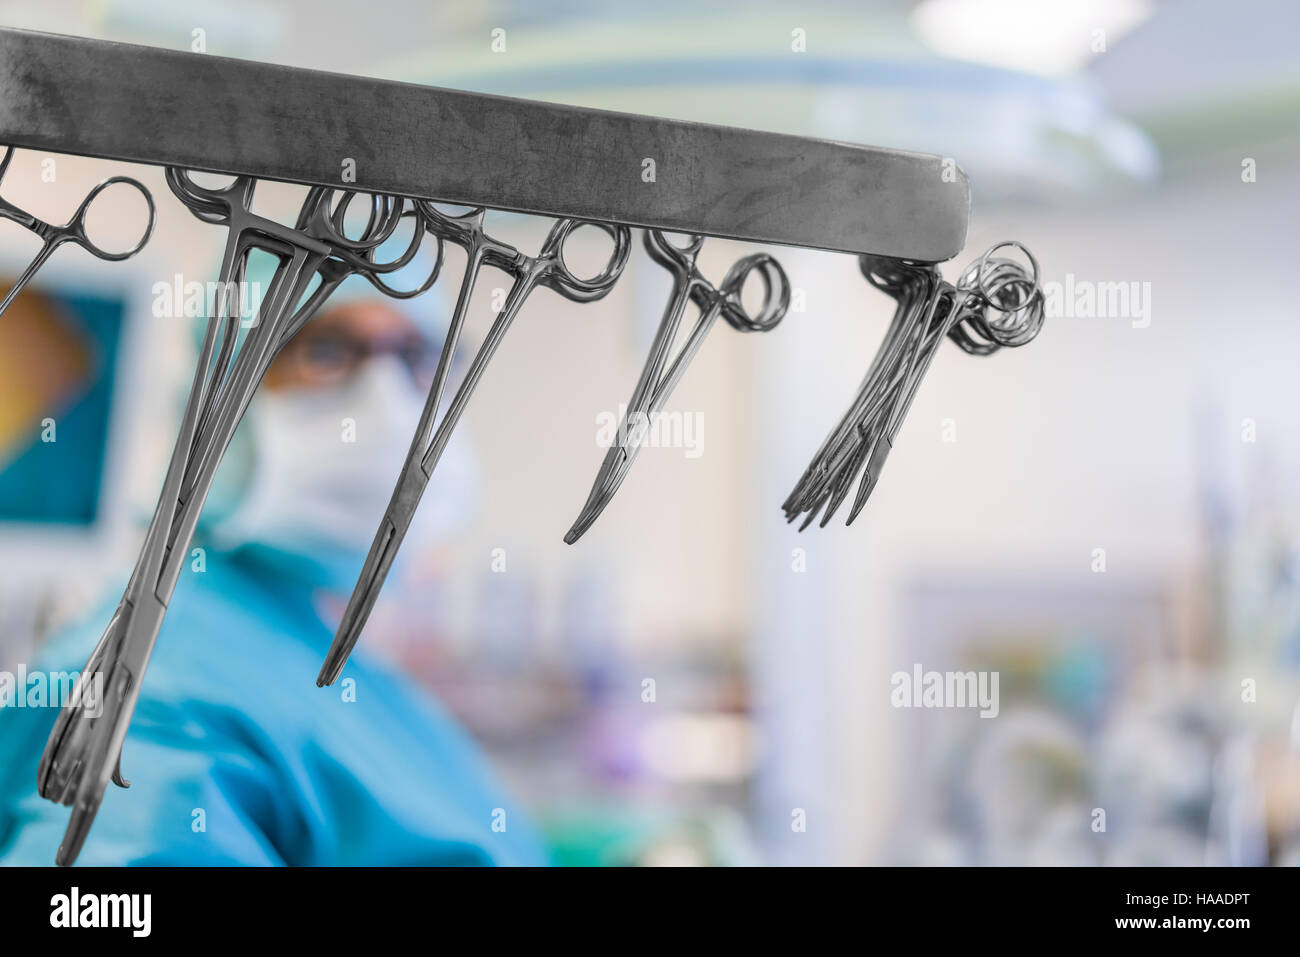 Surgical instruments-Heart valve replacement surgery, operating room, Reykjavik, Iceland Stock Photo